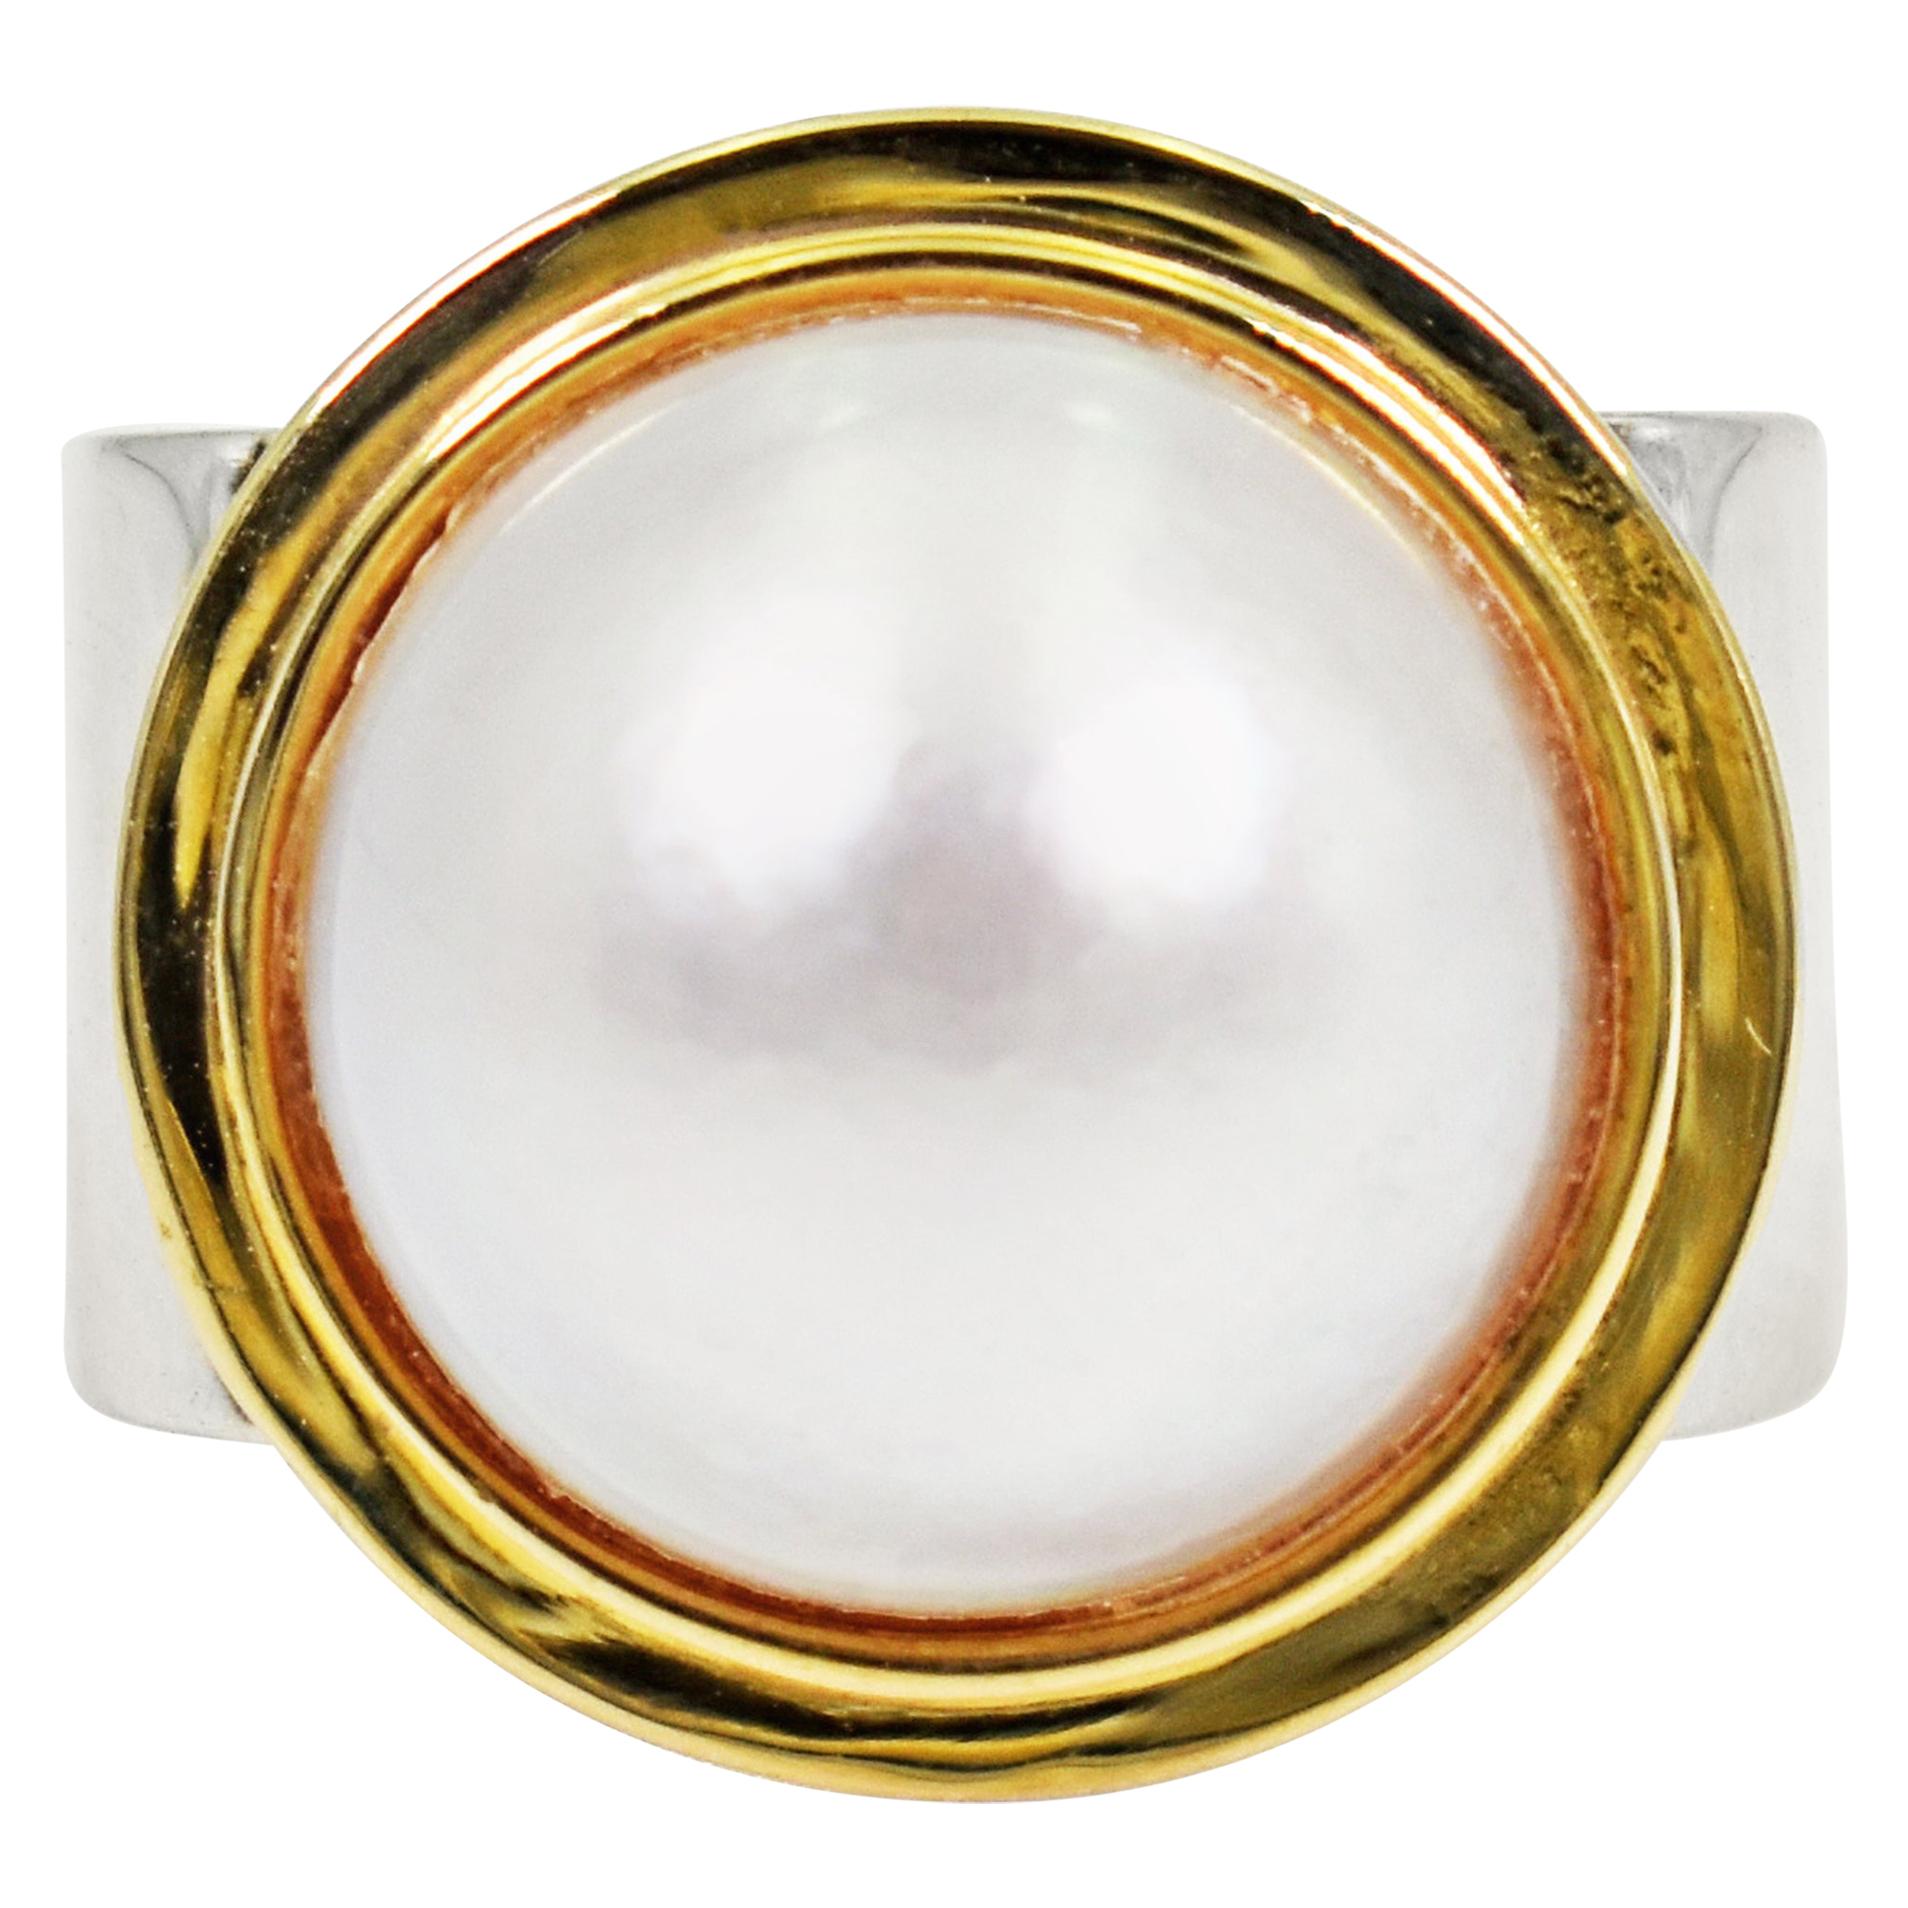 Mabé Pearl 14 Karat Gold and Sterling Silver Two-Tone Cocktail Ring